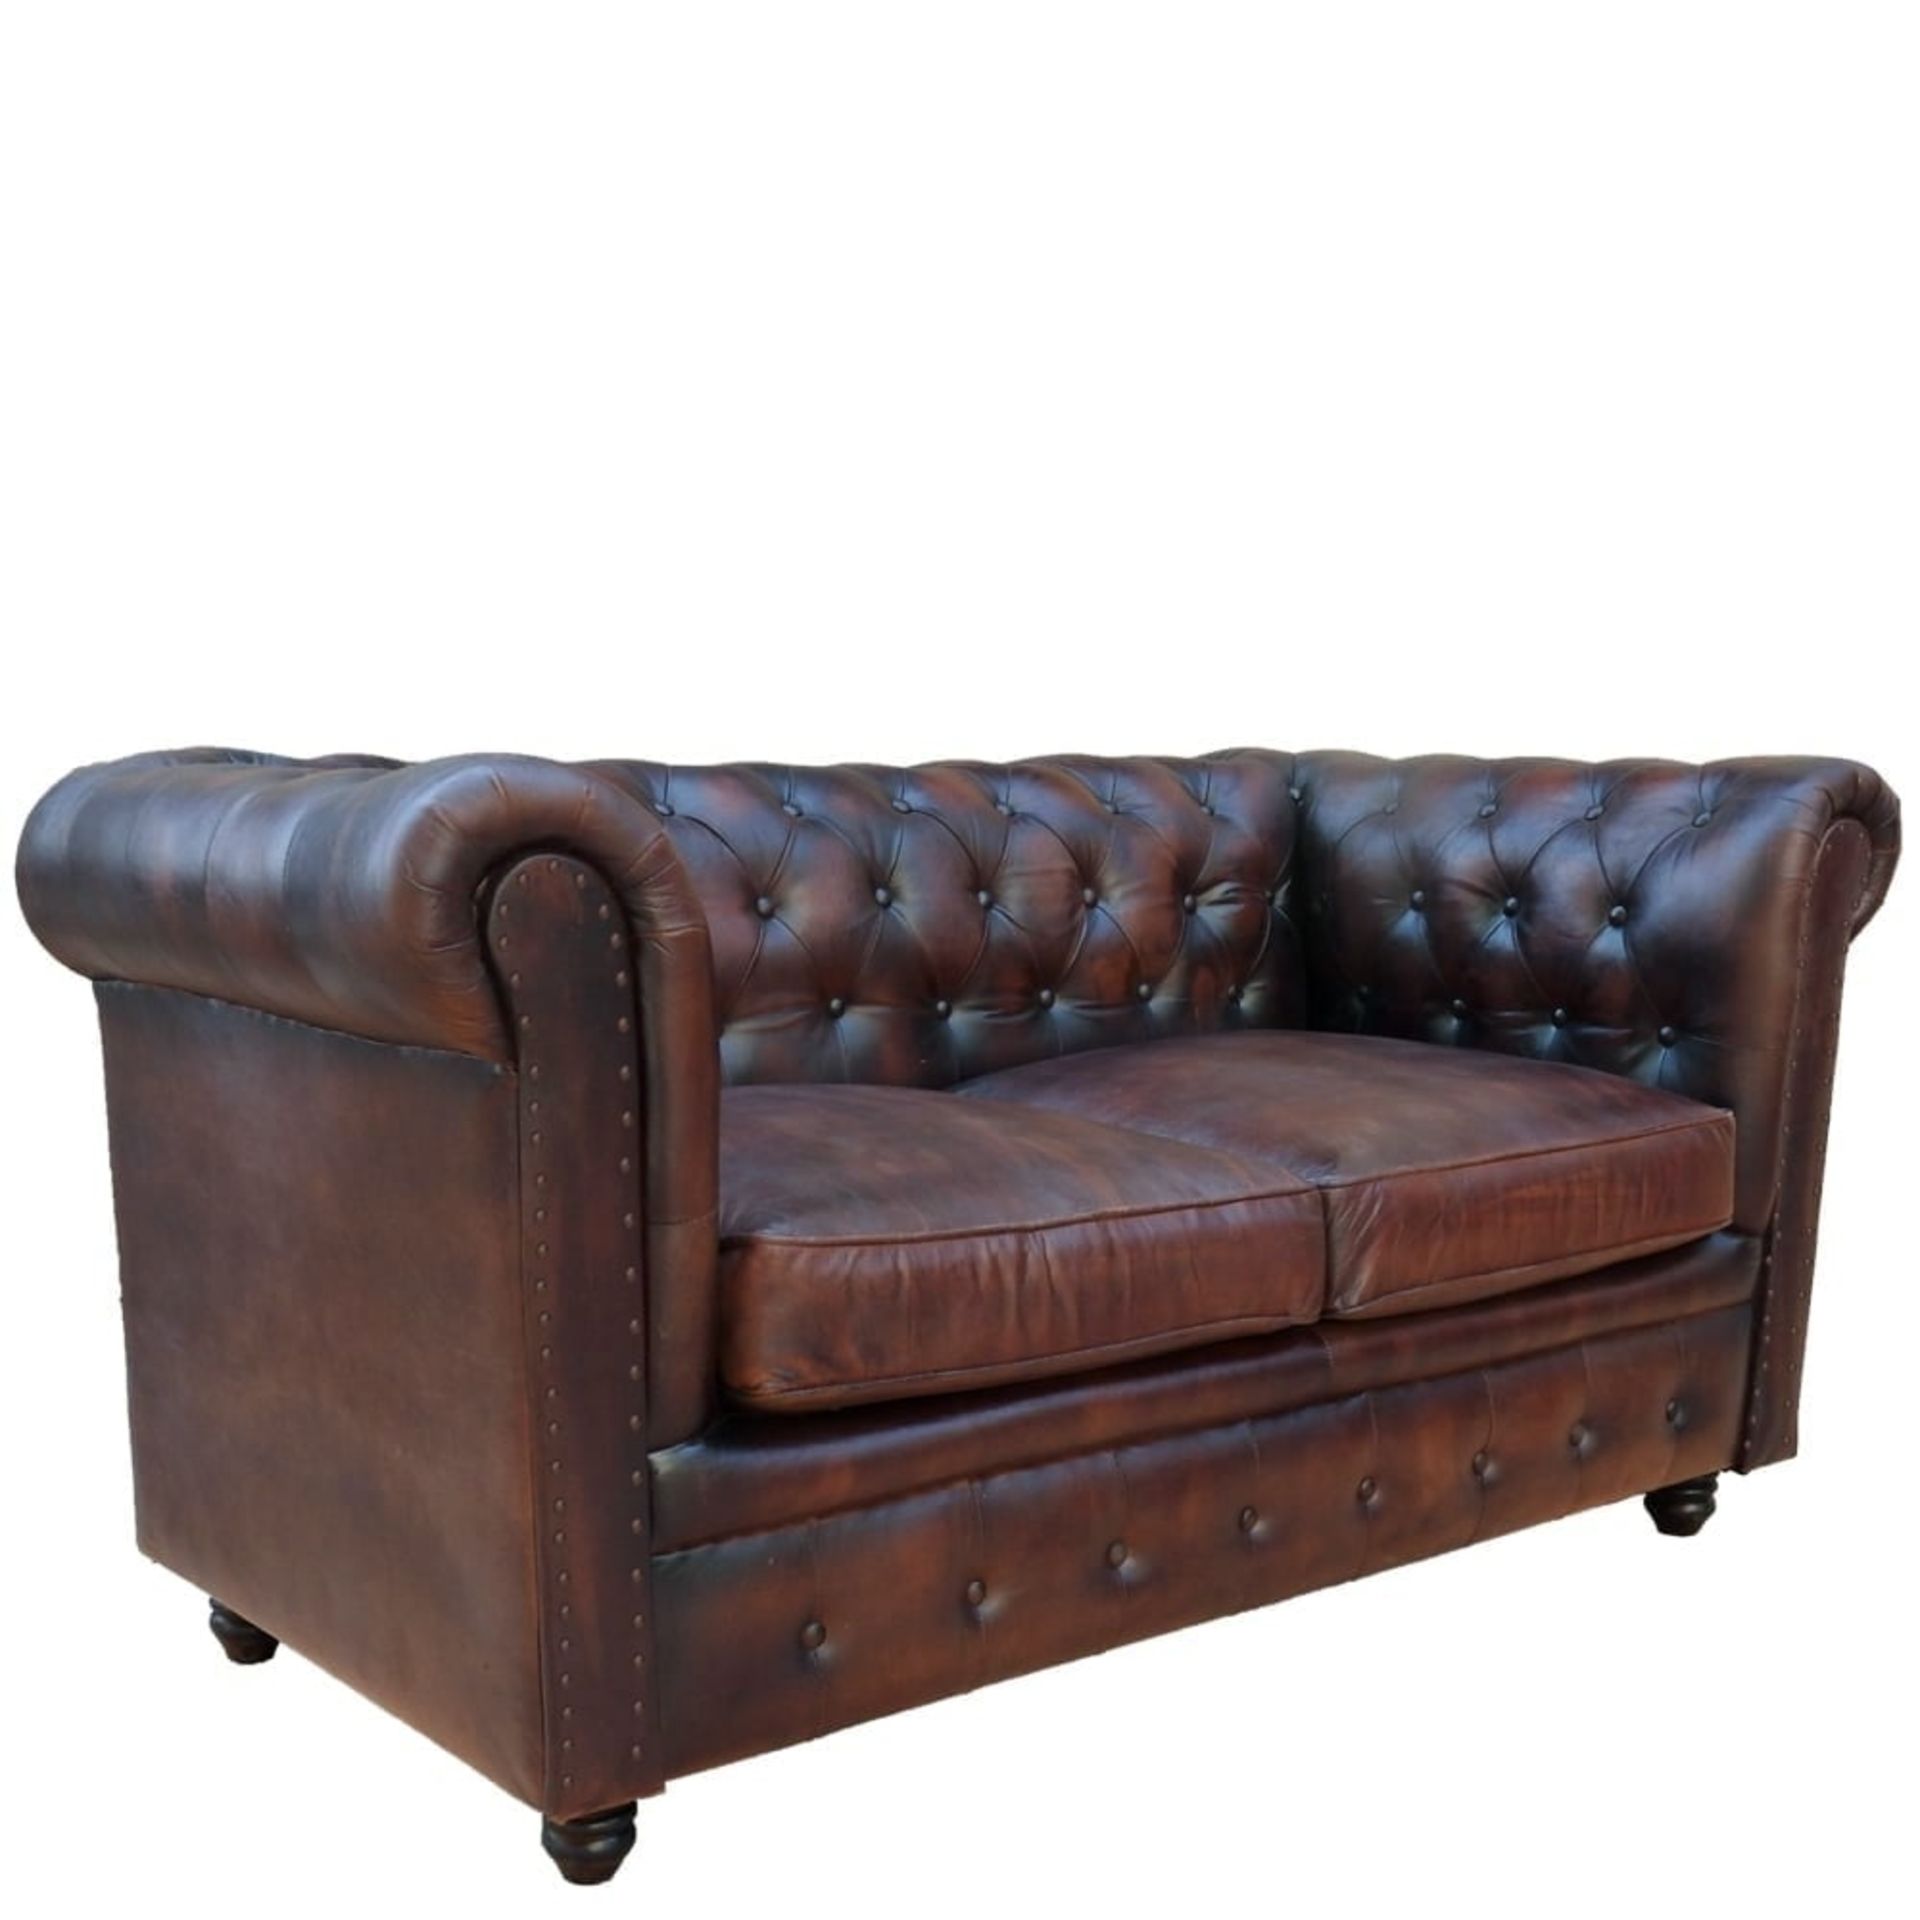 Shoreditch Leather Chesterfield 2-Seater Sofa Handmade - Image 6 of 6